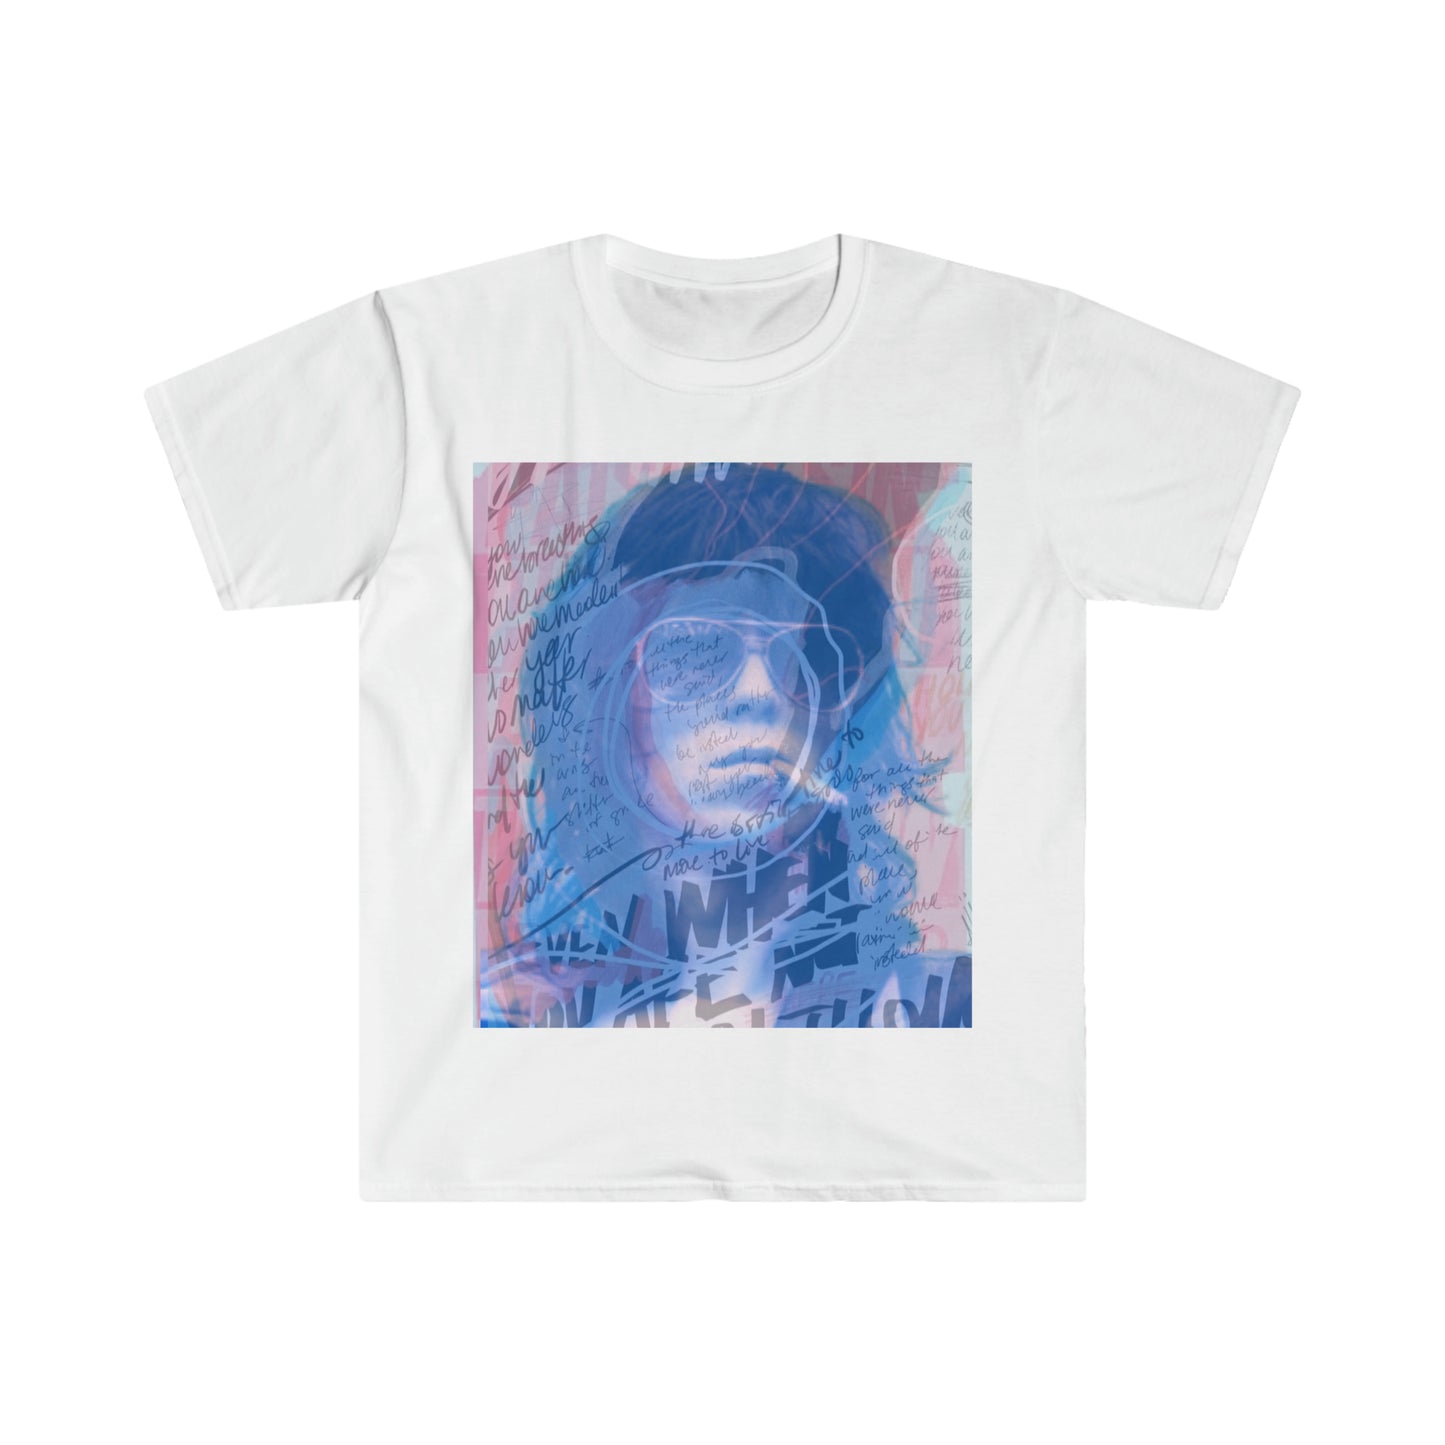 KEEF Classic Fit AmplifyDestroy Print Tee Shirt